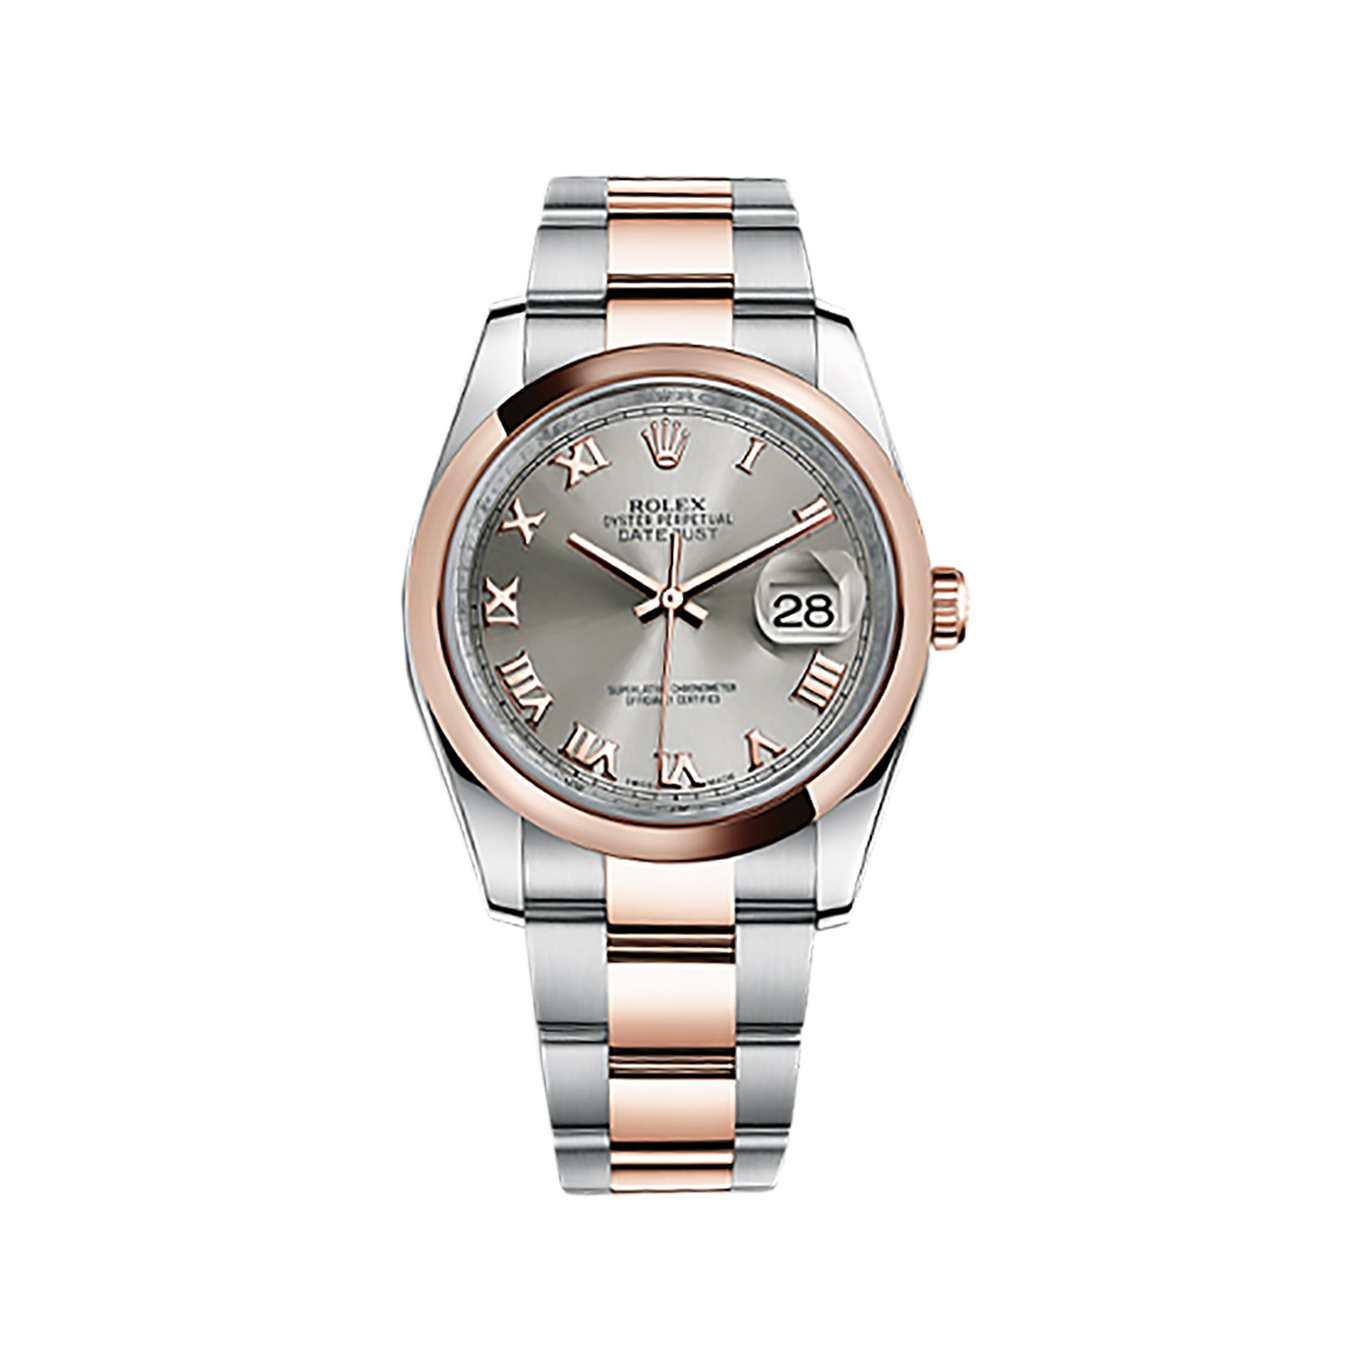 Datejust 36 116201 Rose Gold & Stainless Steel Watch (Steel)